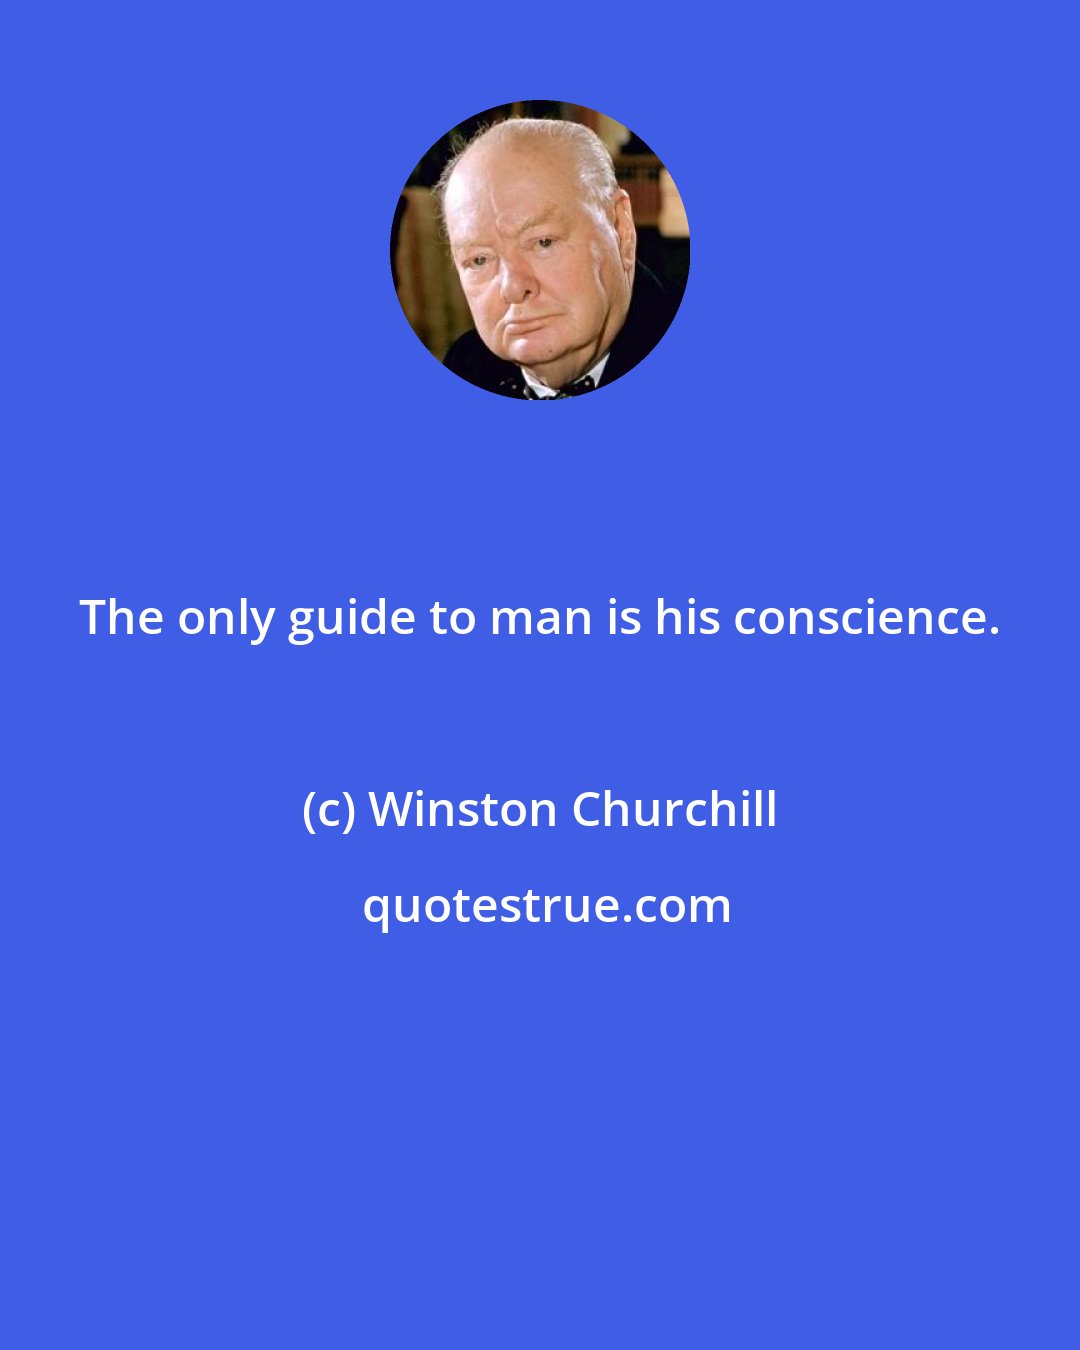 Winston Churchill: The only guide to man is his conscience.